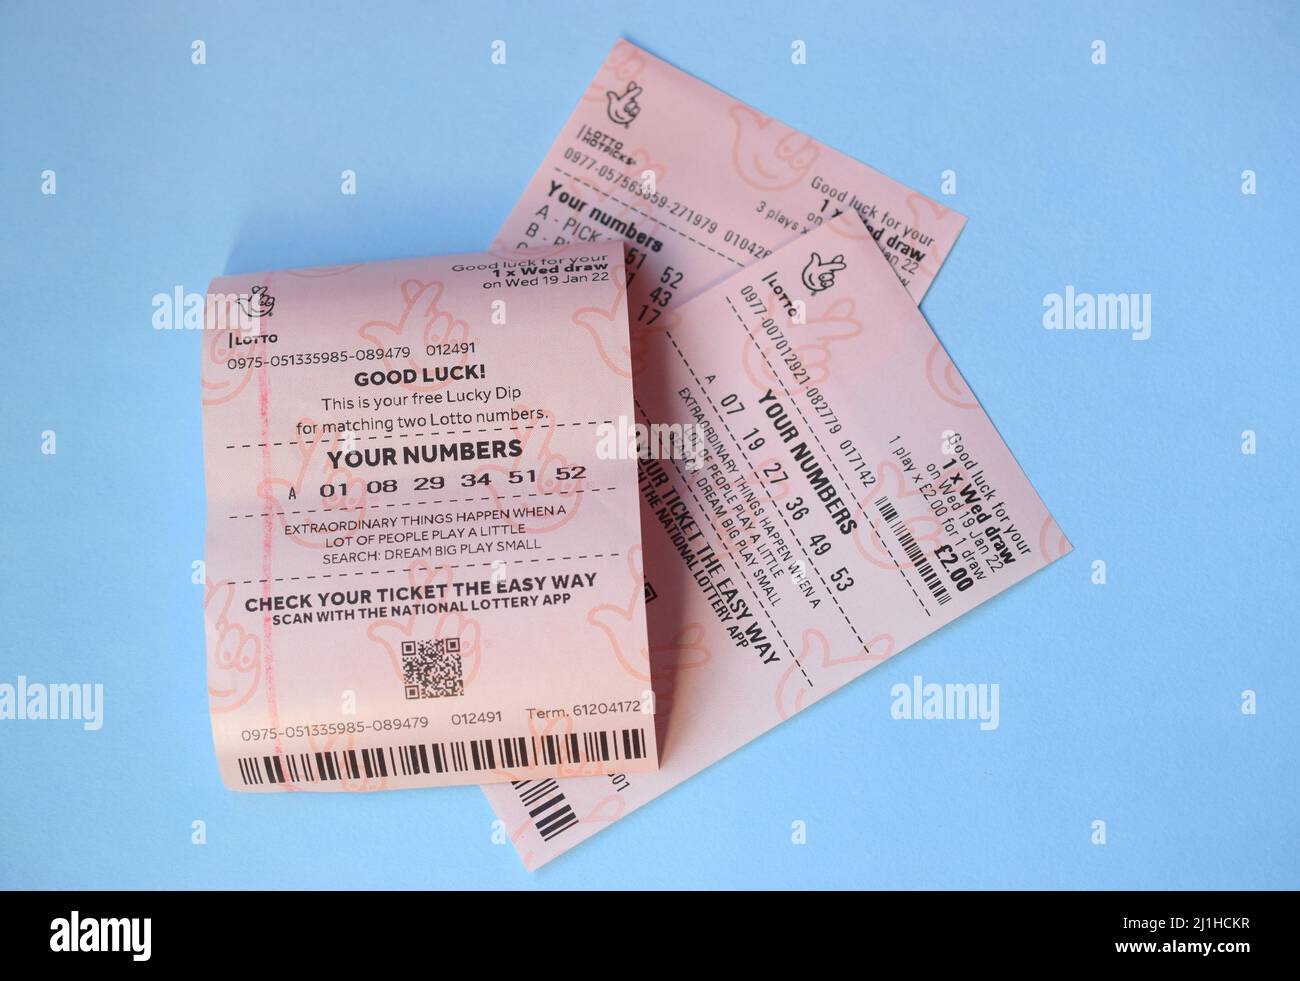 British National lottery tickets on blue background. Stock Photo